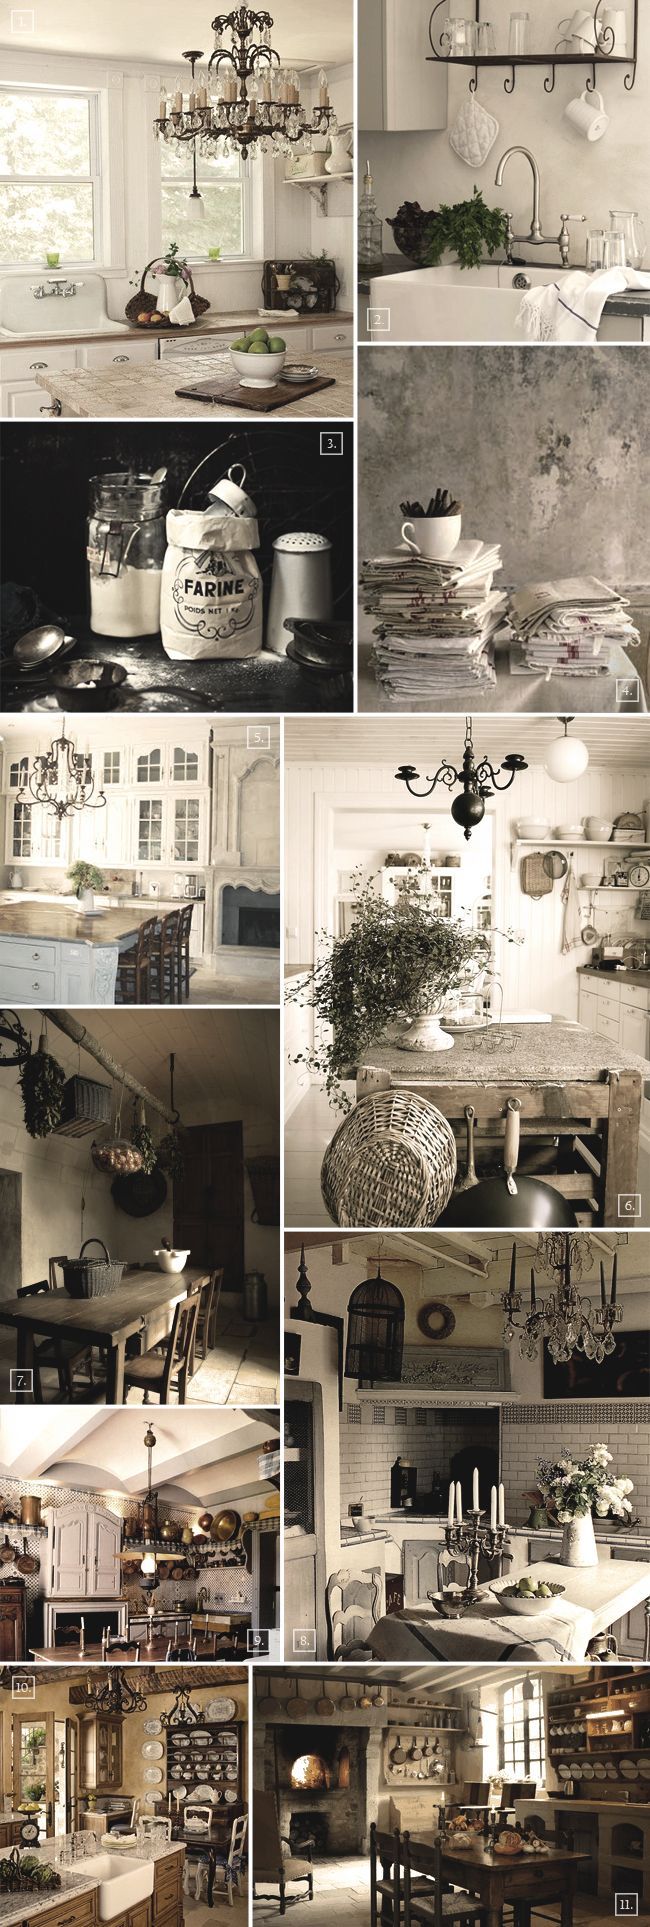 Decor ideas for a French styled kitchen *details* black, cream, grey, cast iron styling and cream painted metal